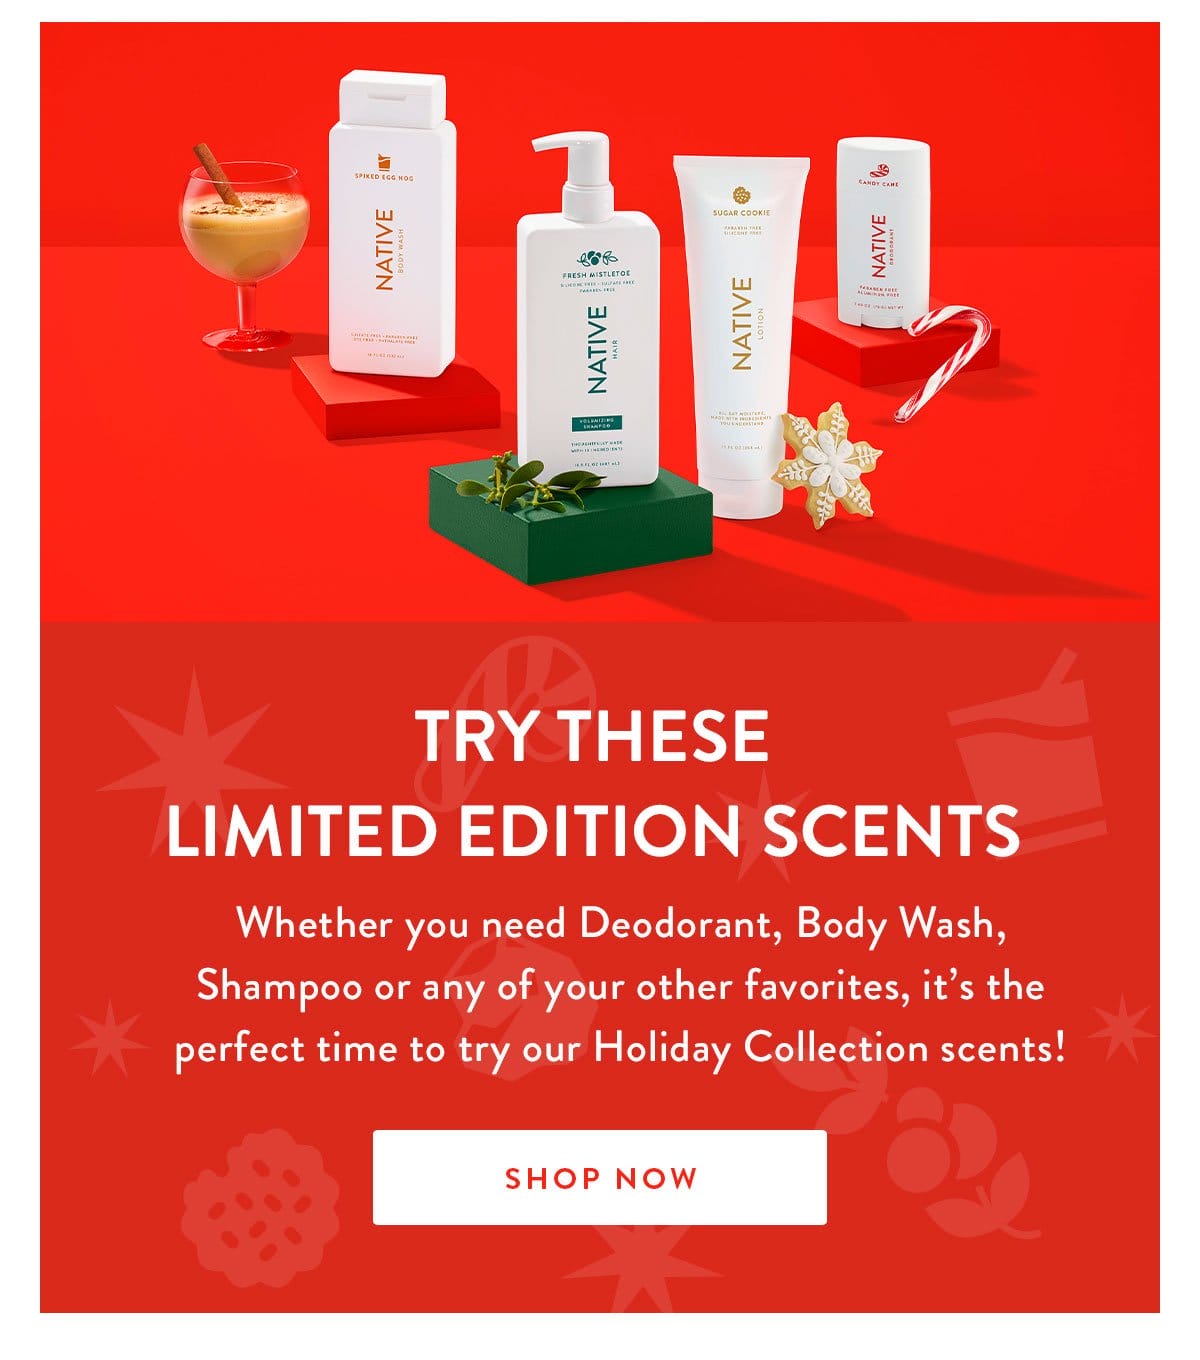 TRY THESE LIMITED EDITION SCENTS | Whether you need Deodorant, Body Wash, Shampoo or any of your other favorites, it’s the perfect time to try our Holiday Collection scents! | SHOP NOW